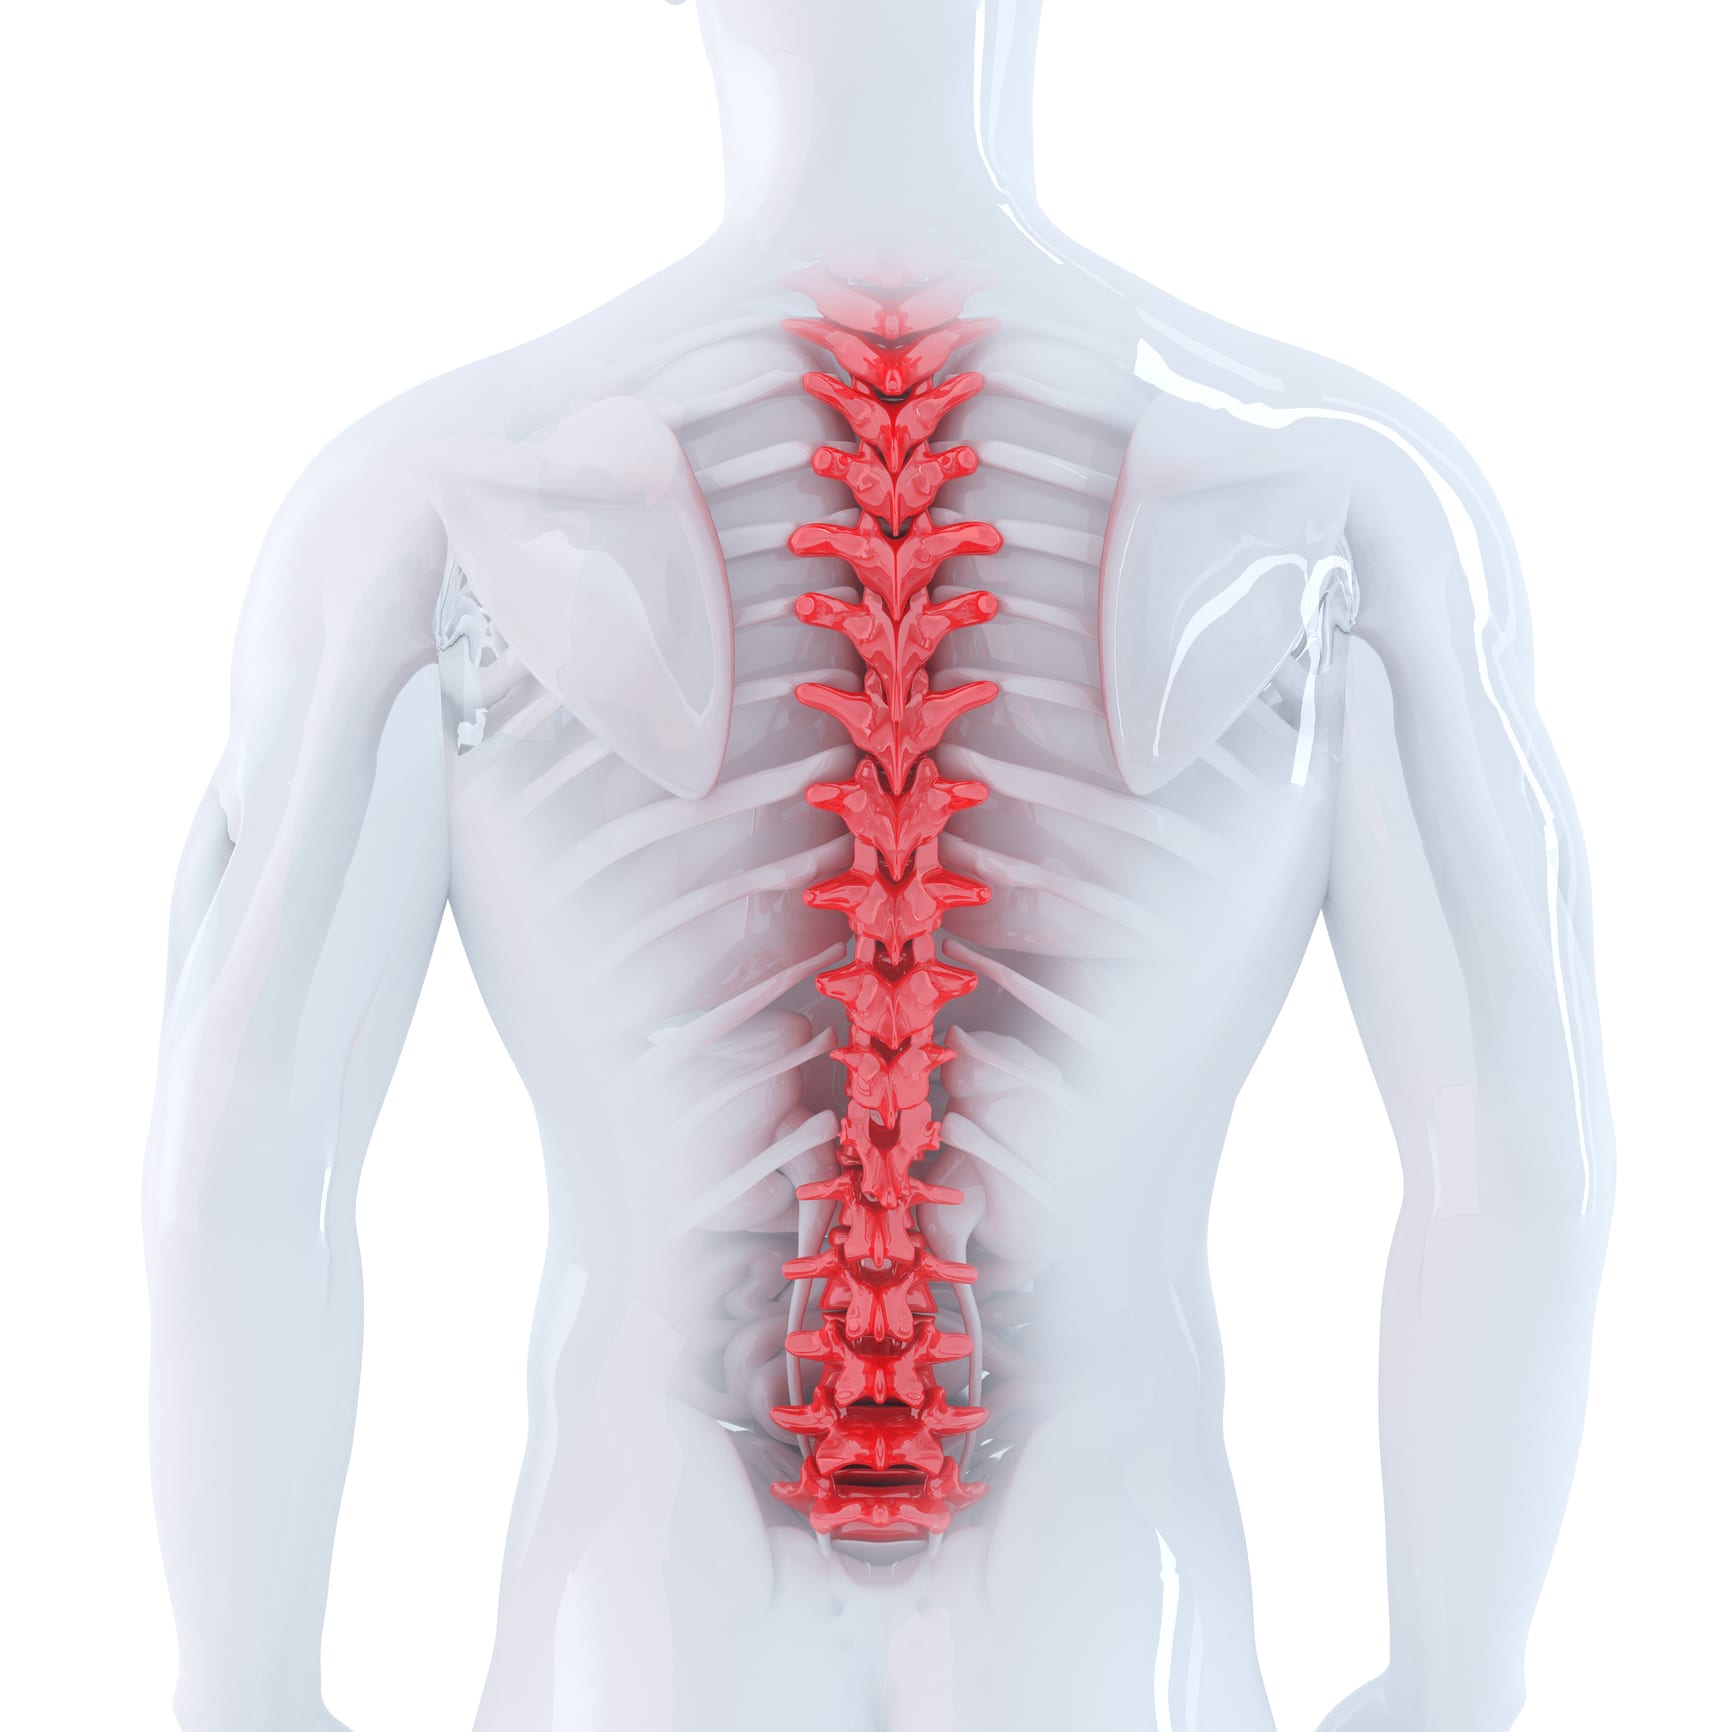 The Thoracic Spine Anatomy Function And Common Injuries Spine